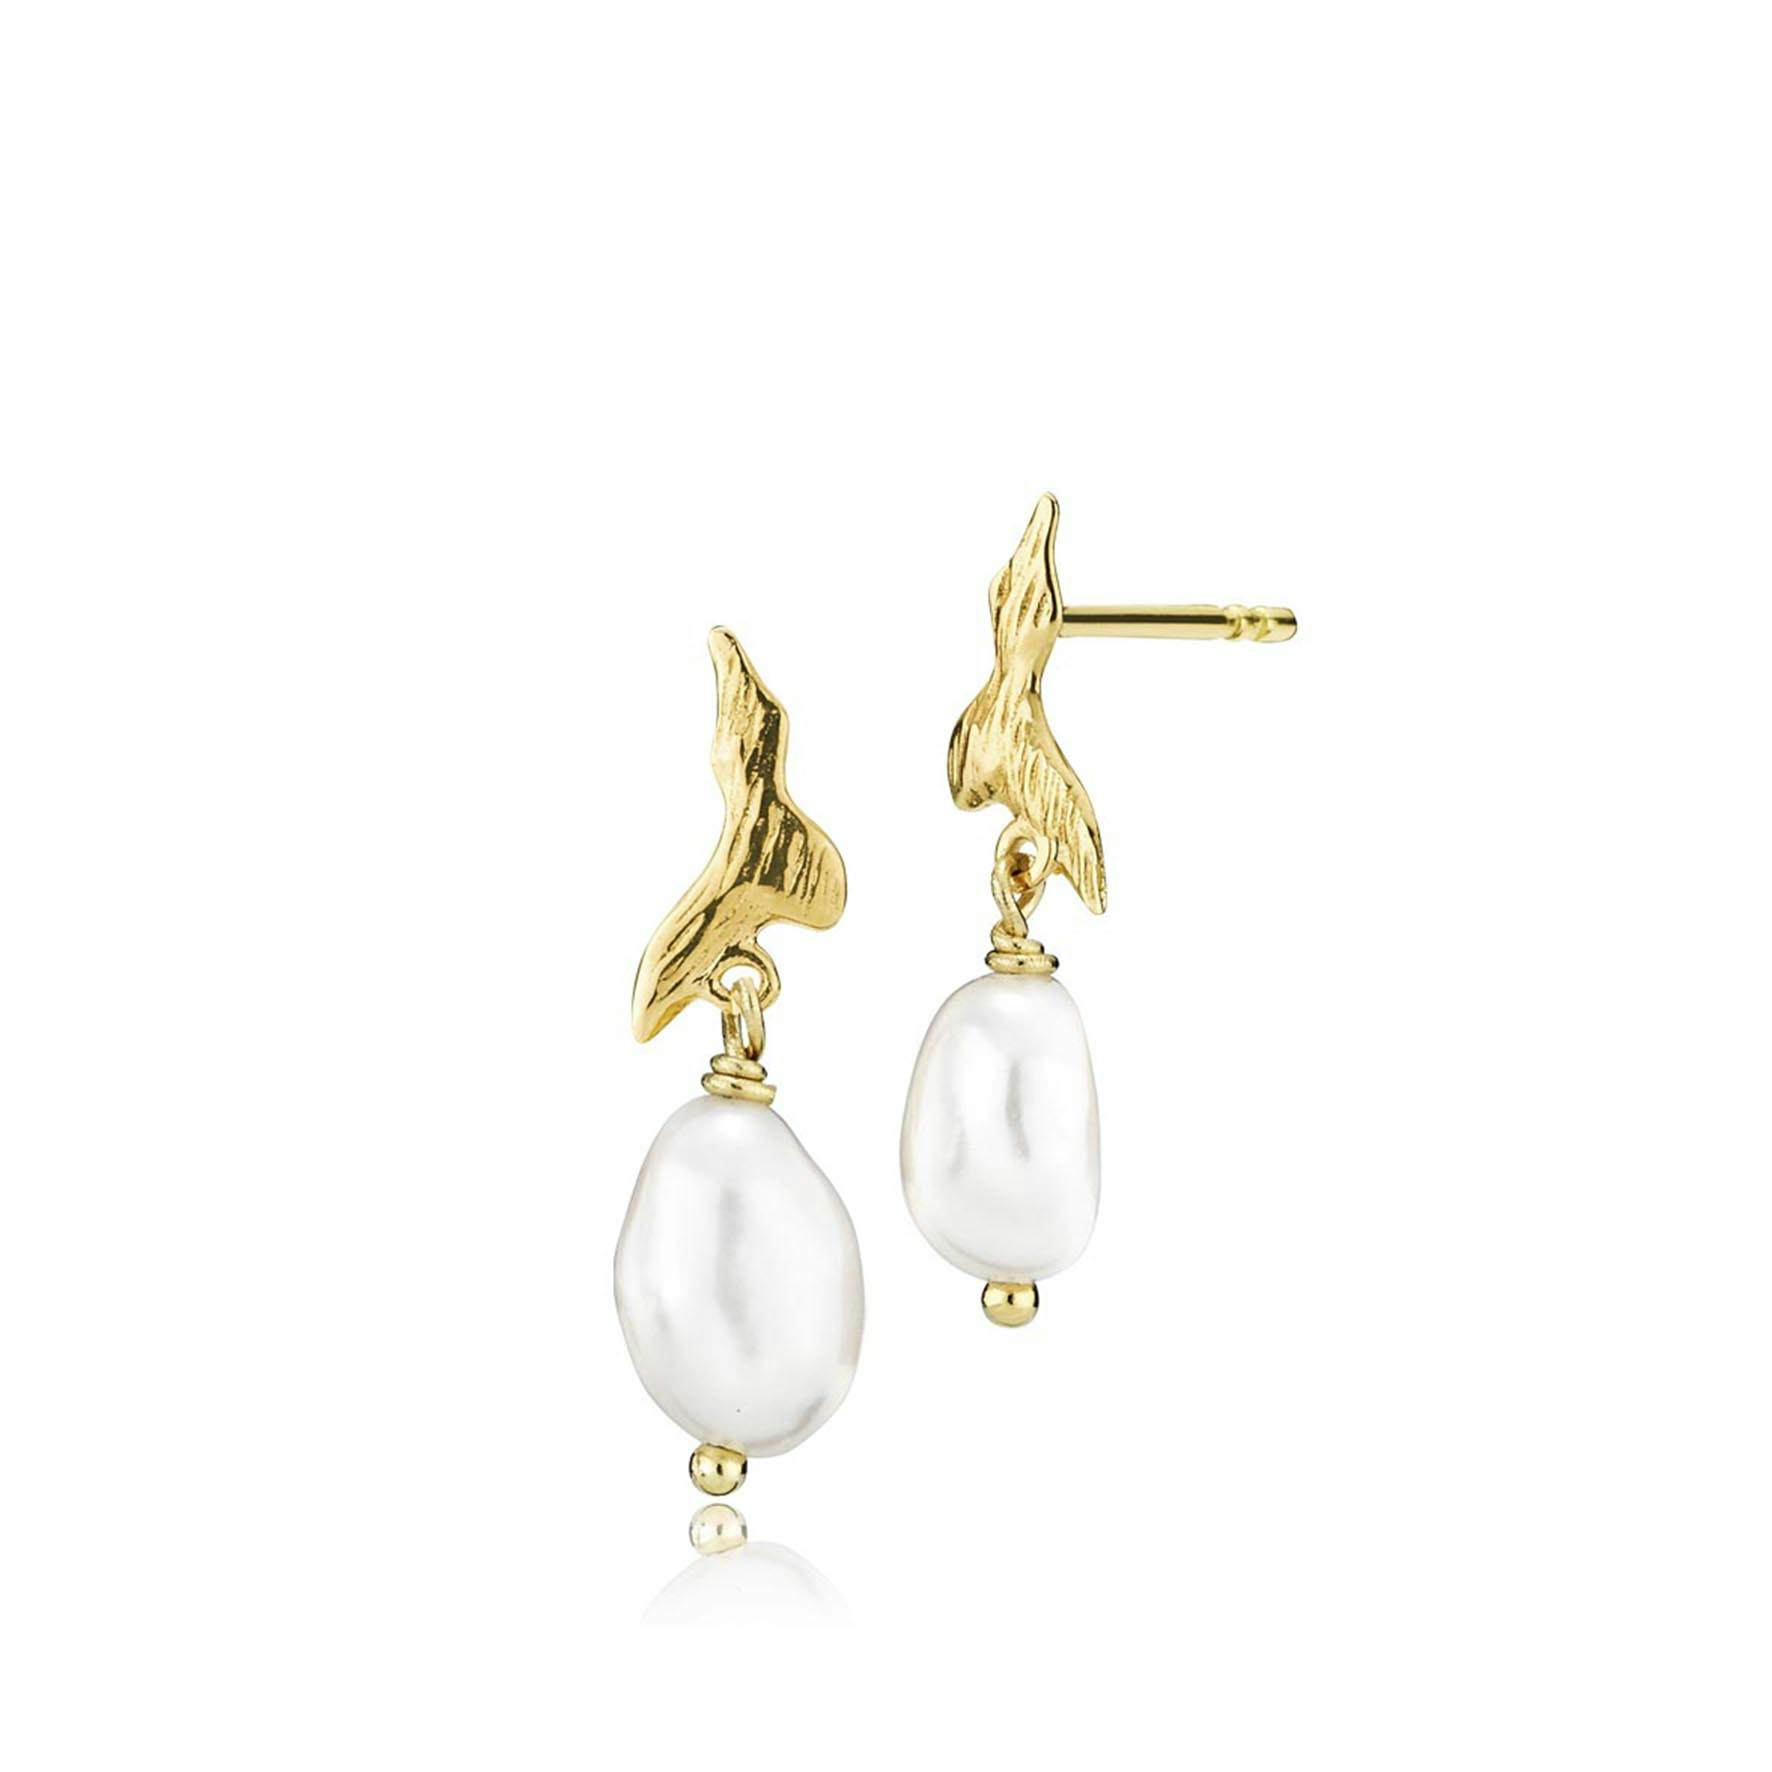 Fairy Earrings With Pearl from Izabel Camille in Goldplated-Silver Sterling 925|Freshwater Pearl